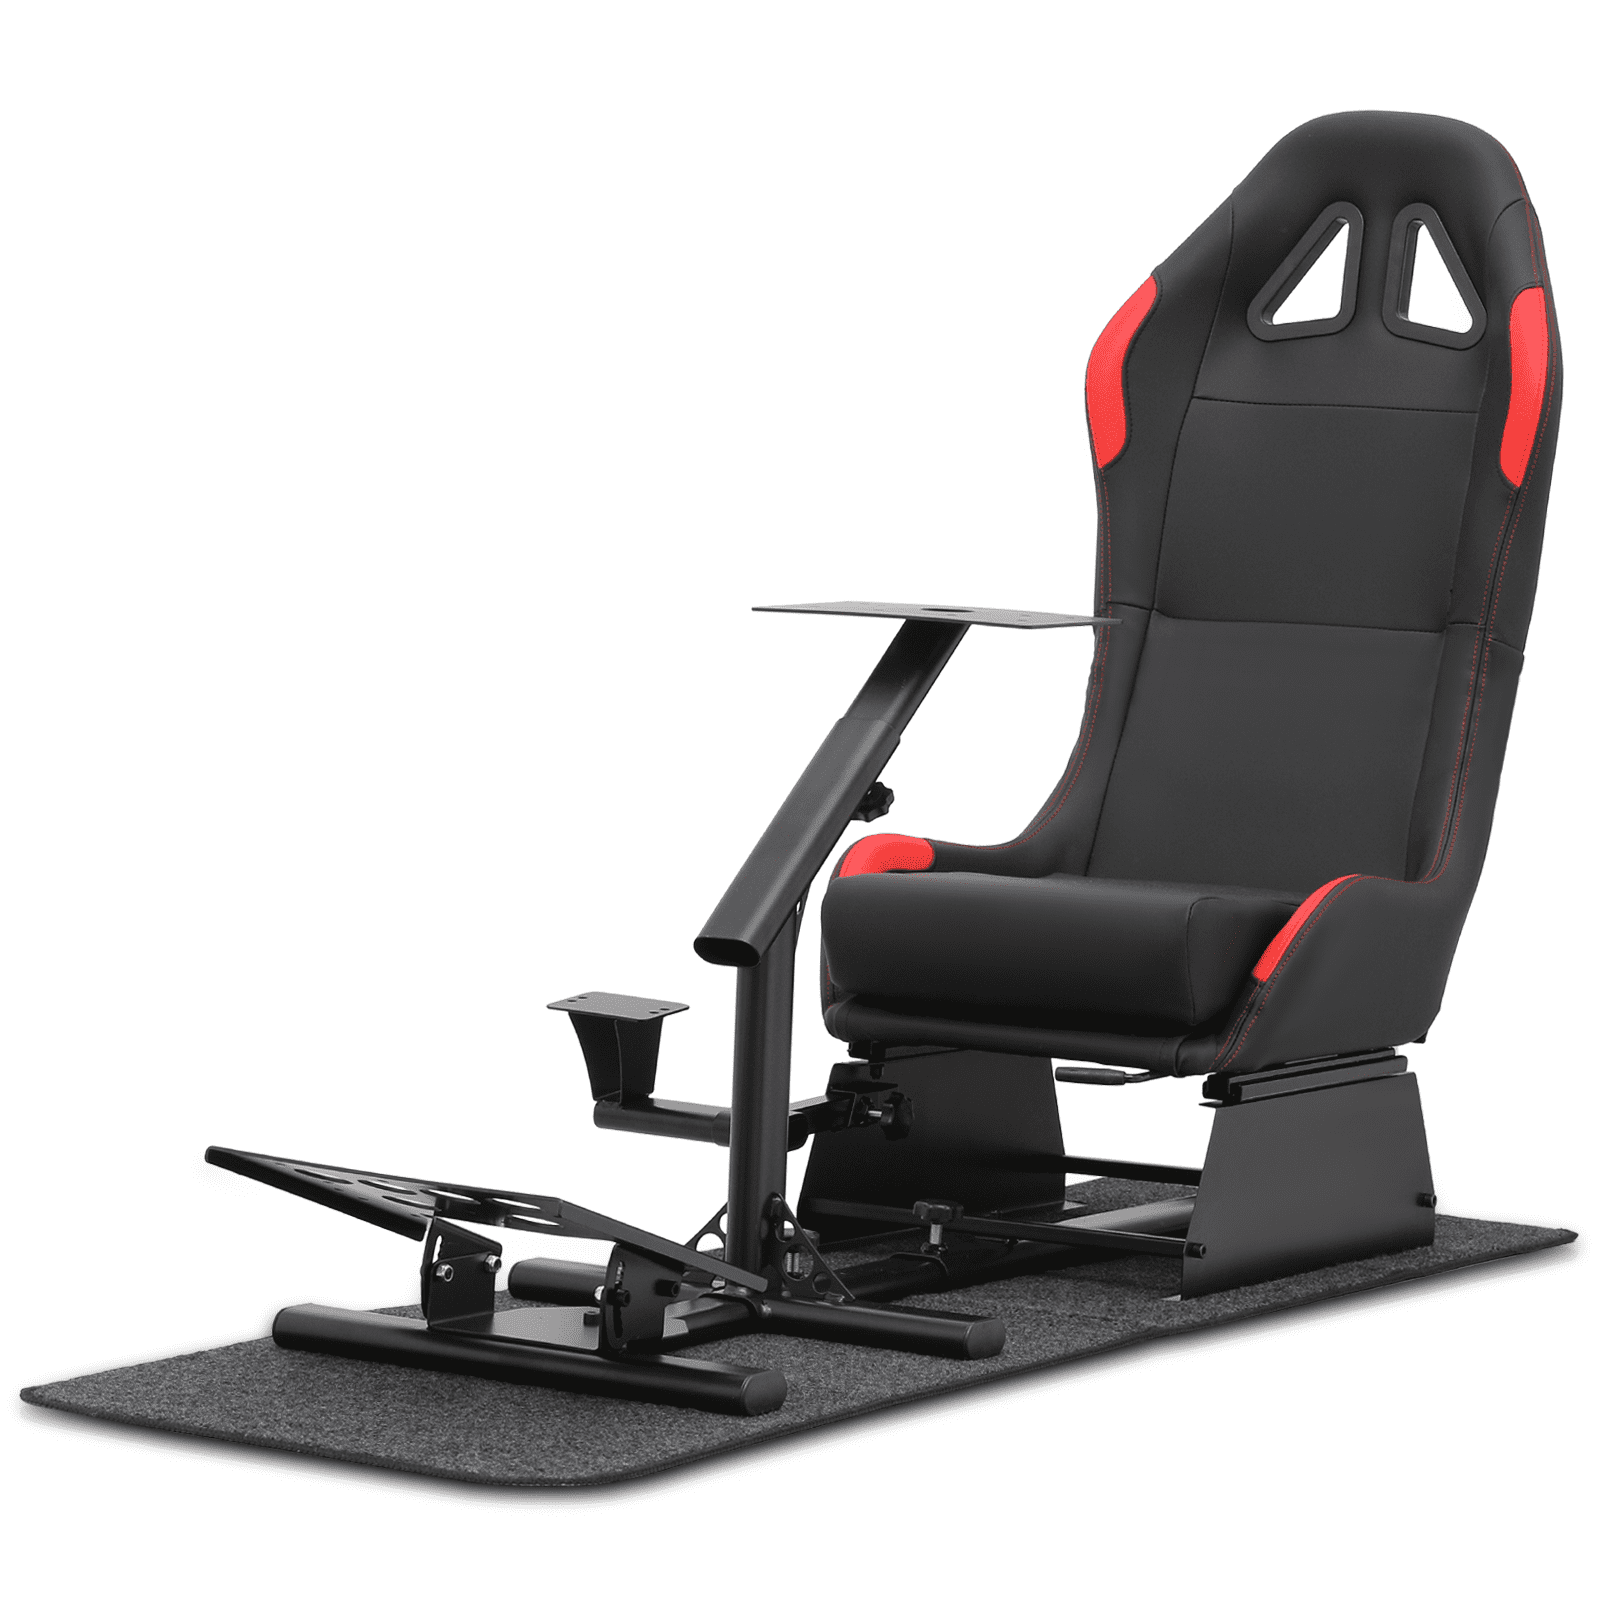 Fly YUTING Boss Office Chair Game Cockpit vs HYCJJL Boss Office Chair Game  Cockpit !! worth it? 